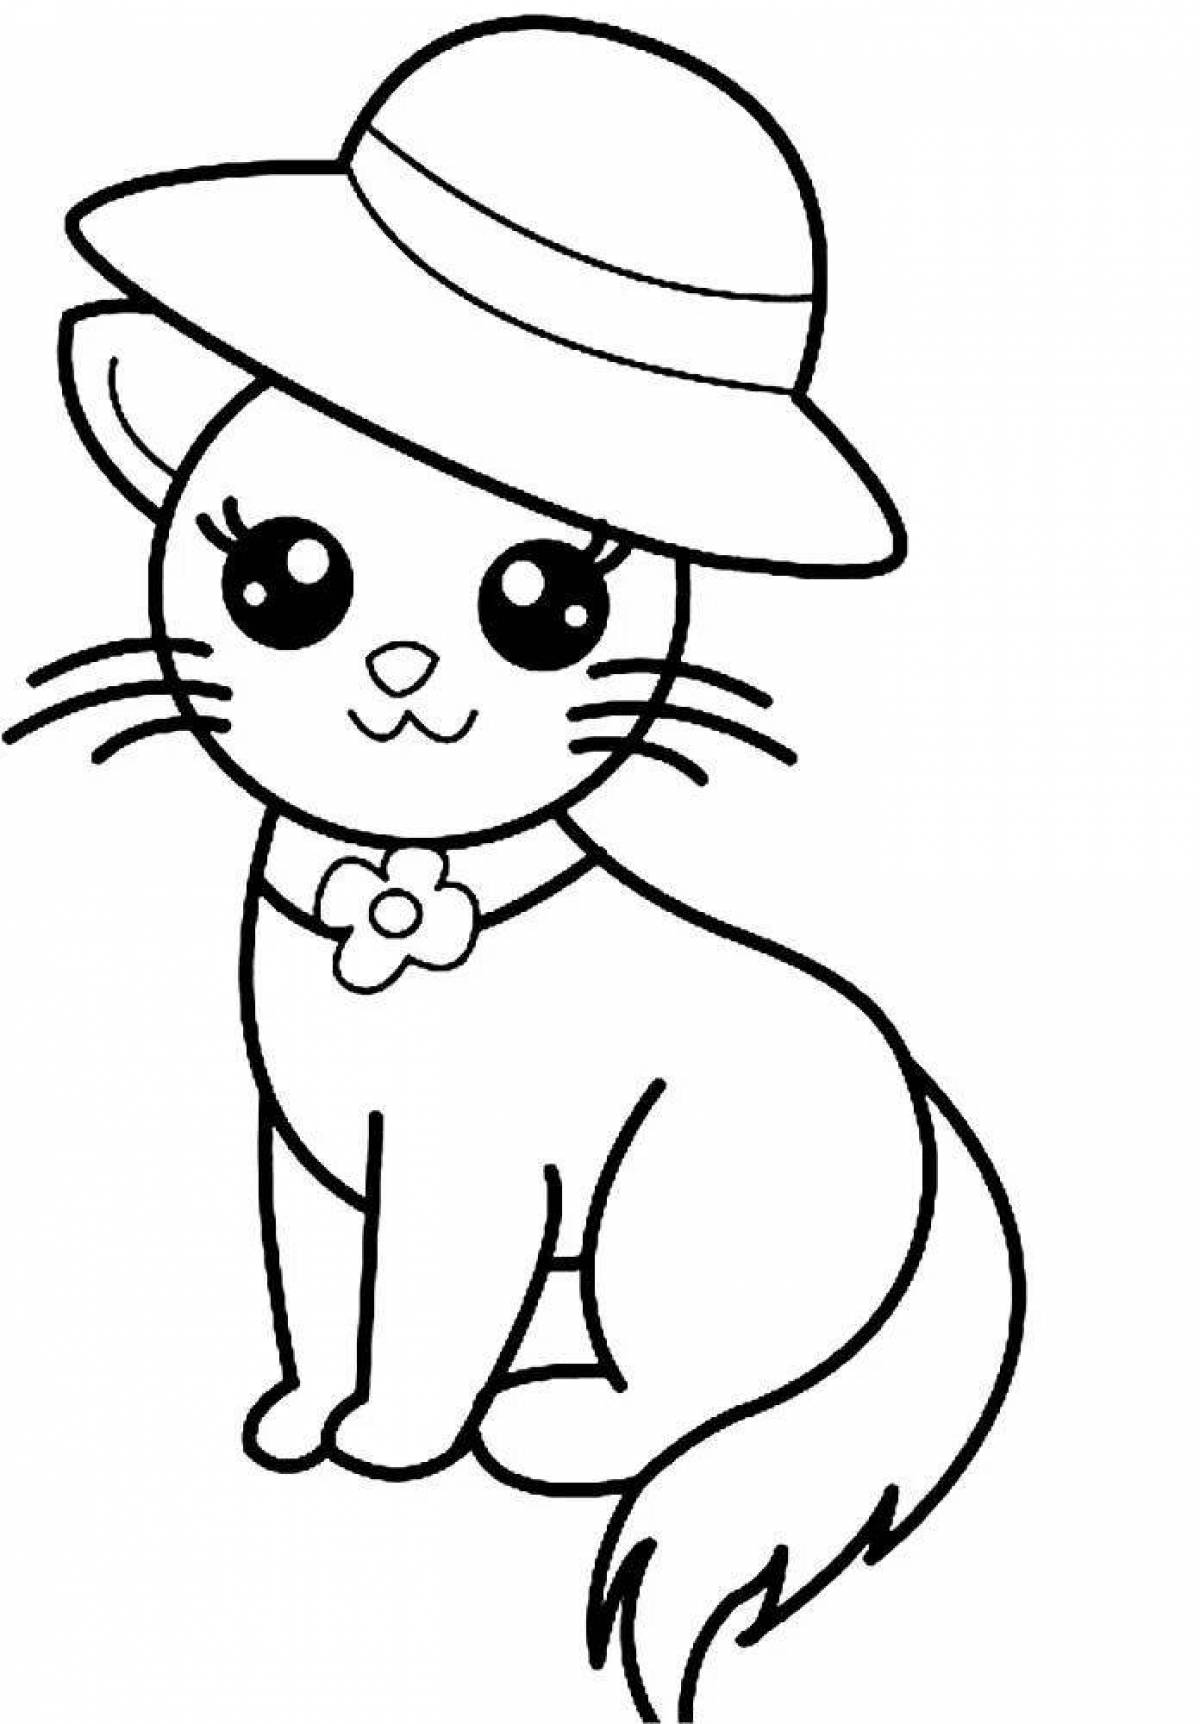 Cat Cartoon Coloring Pages - Coloring Pages For All Ages